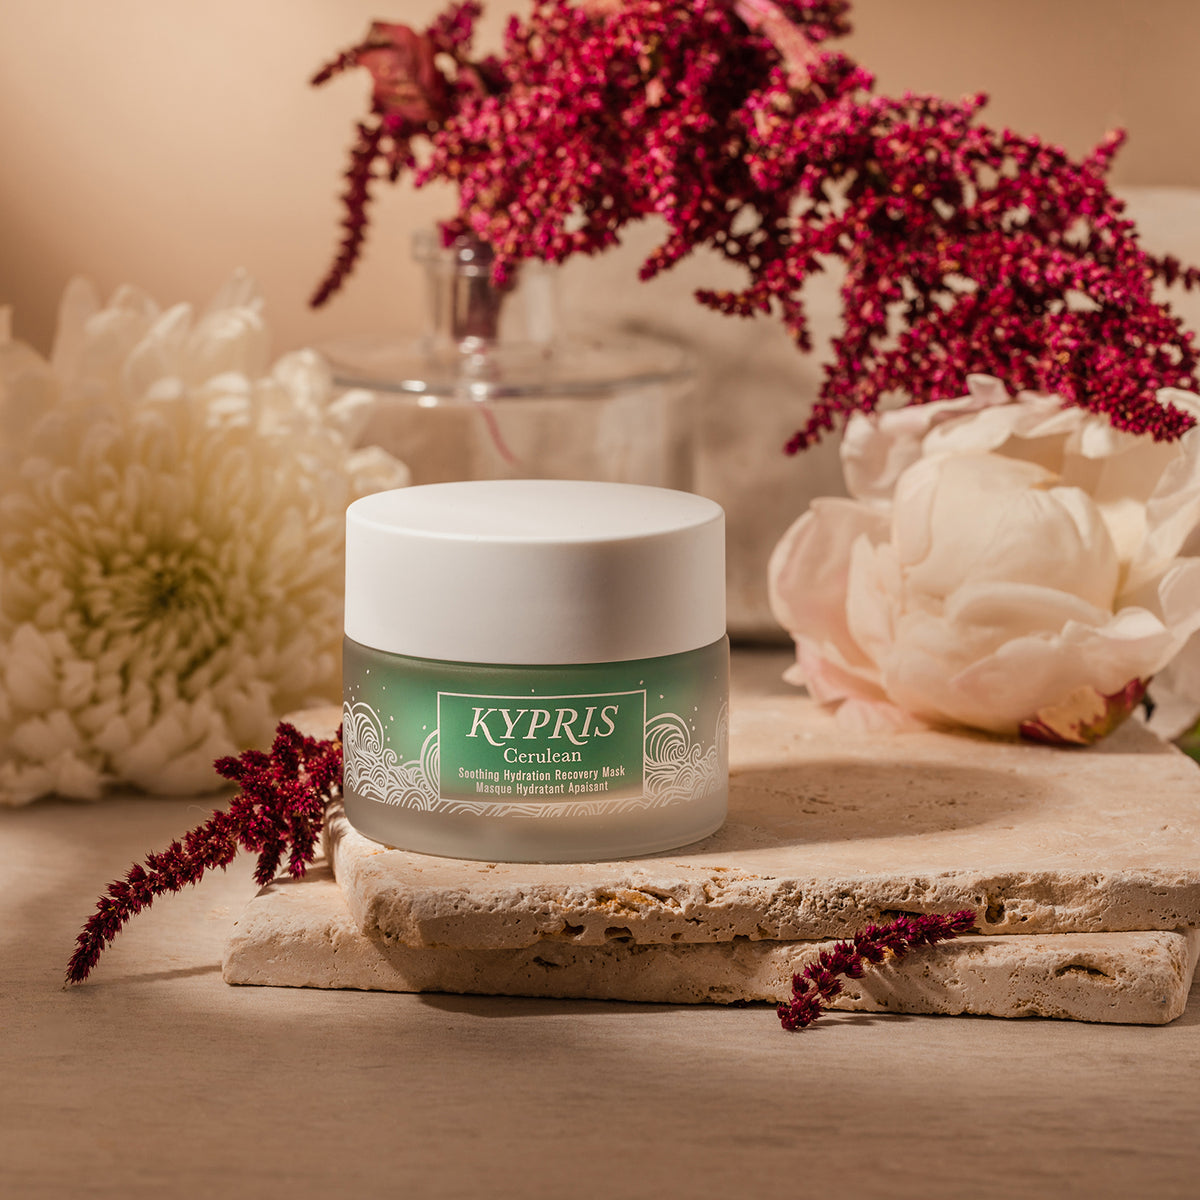 Cerulean Soothing Hydration Mask among red and white flowers